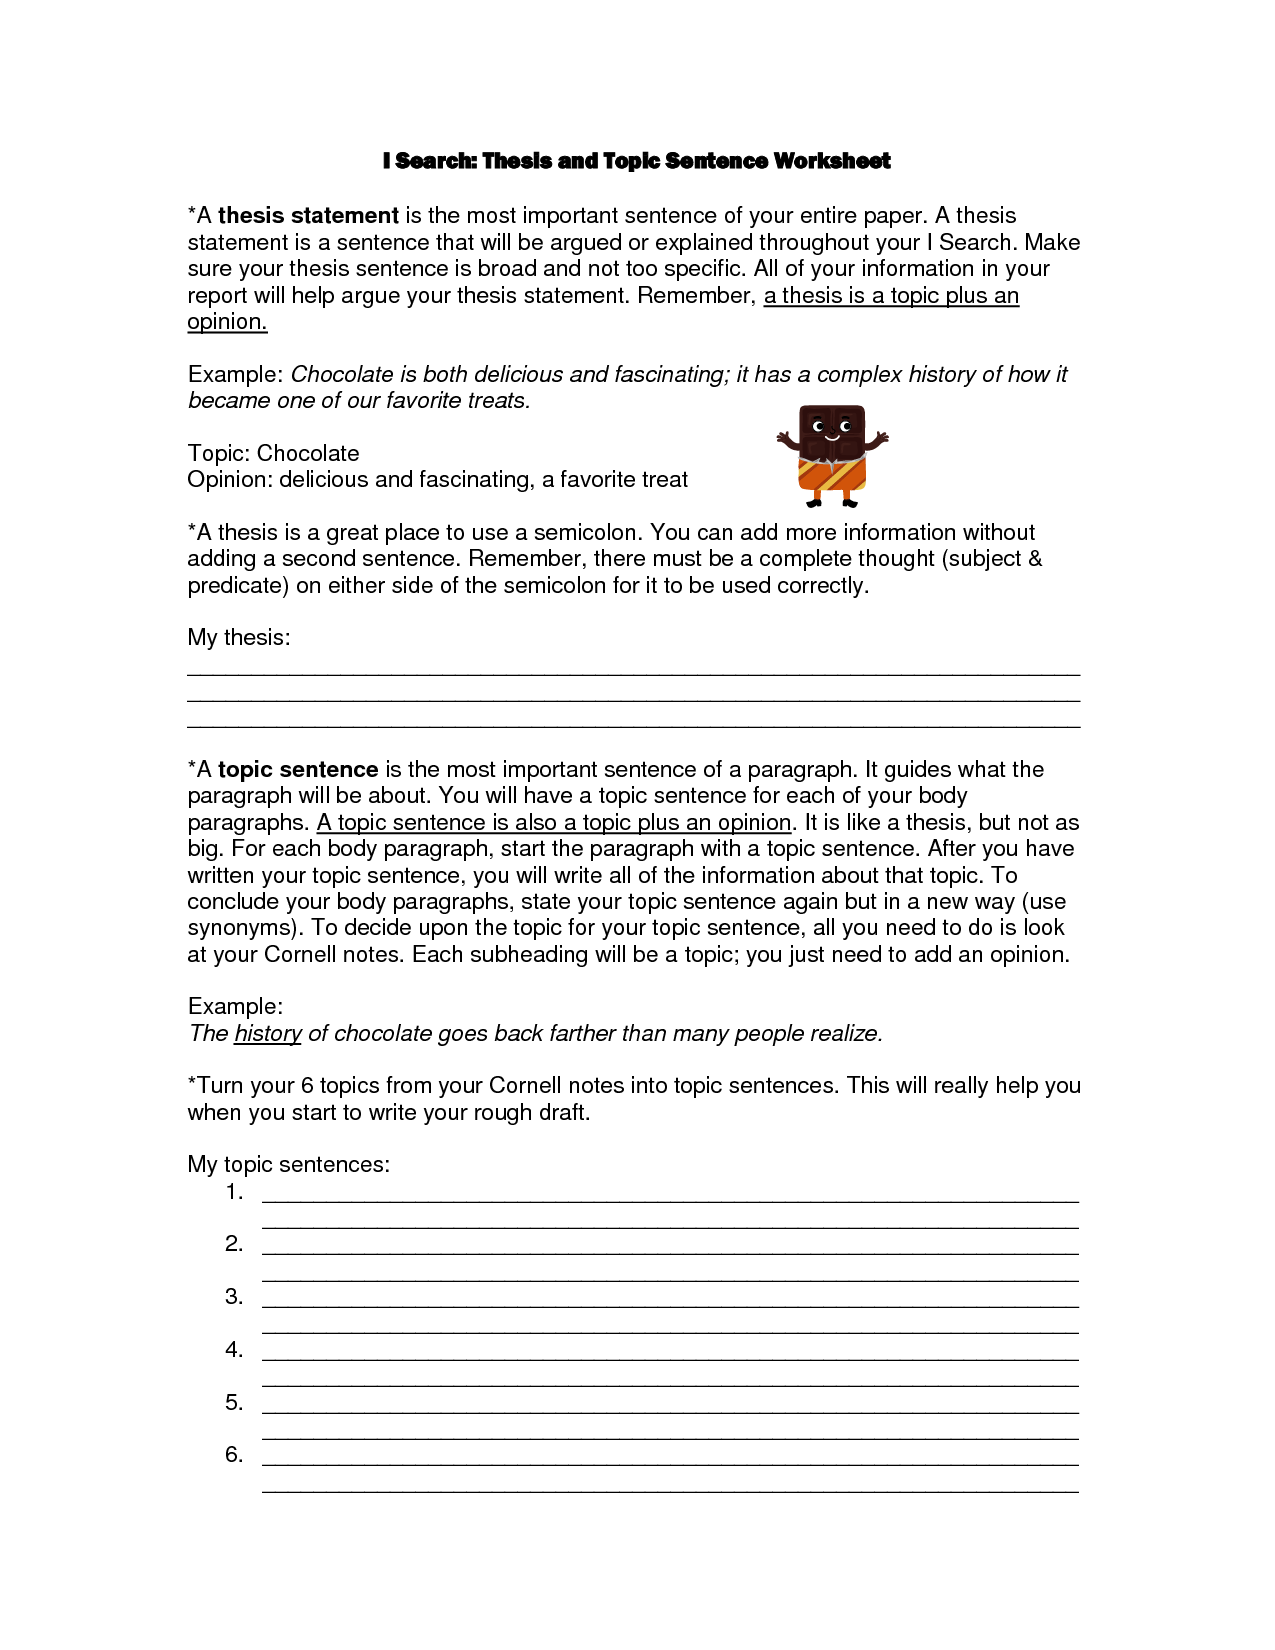 11 Best Images Of Topic Sentence Worksheets Writing Topic Sentences 